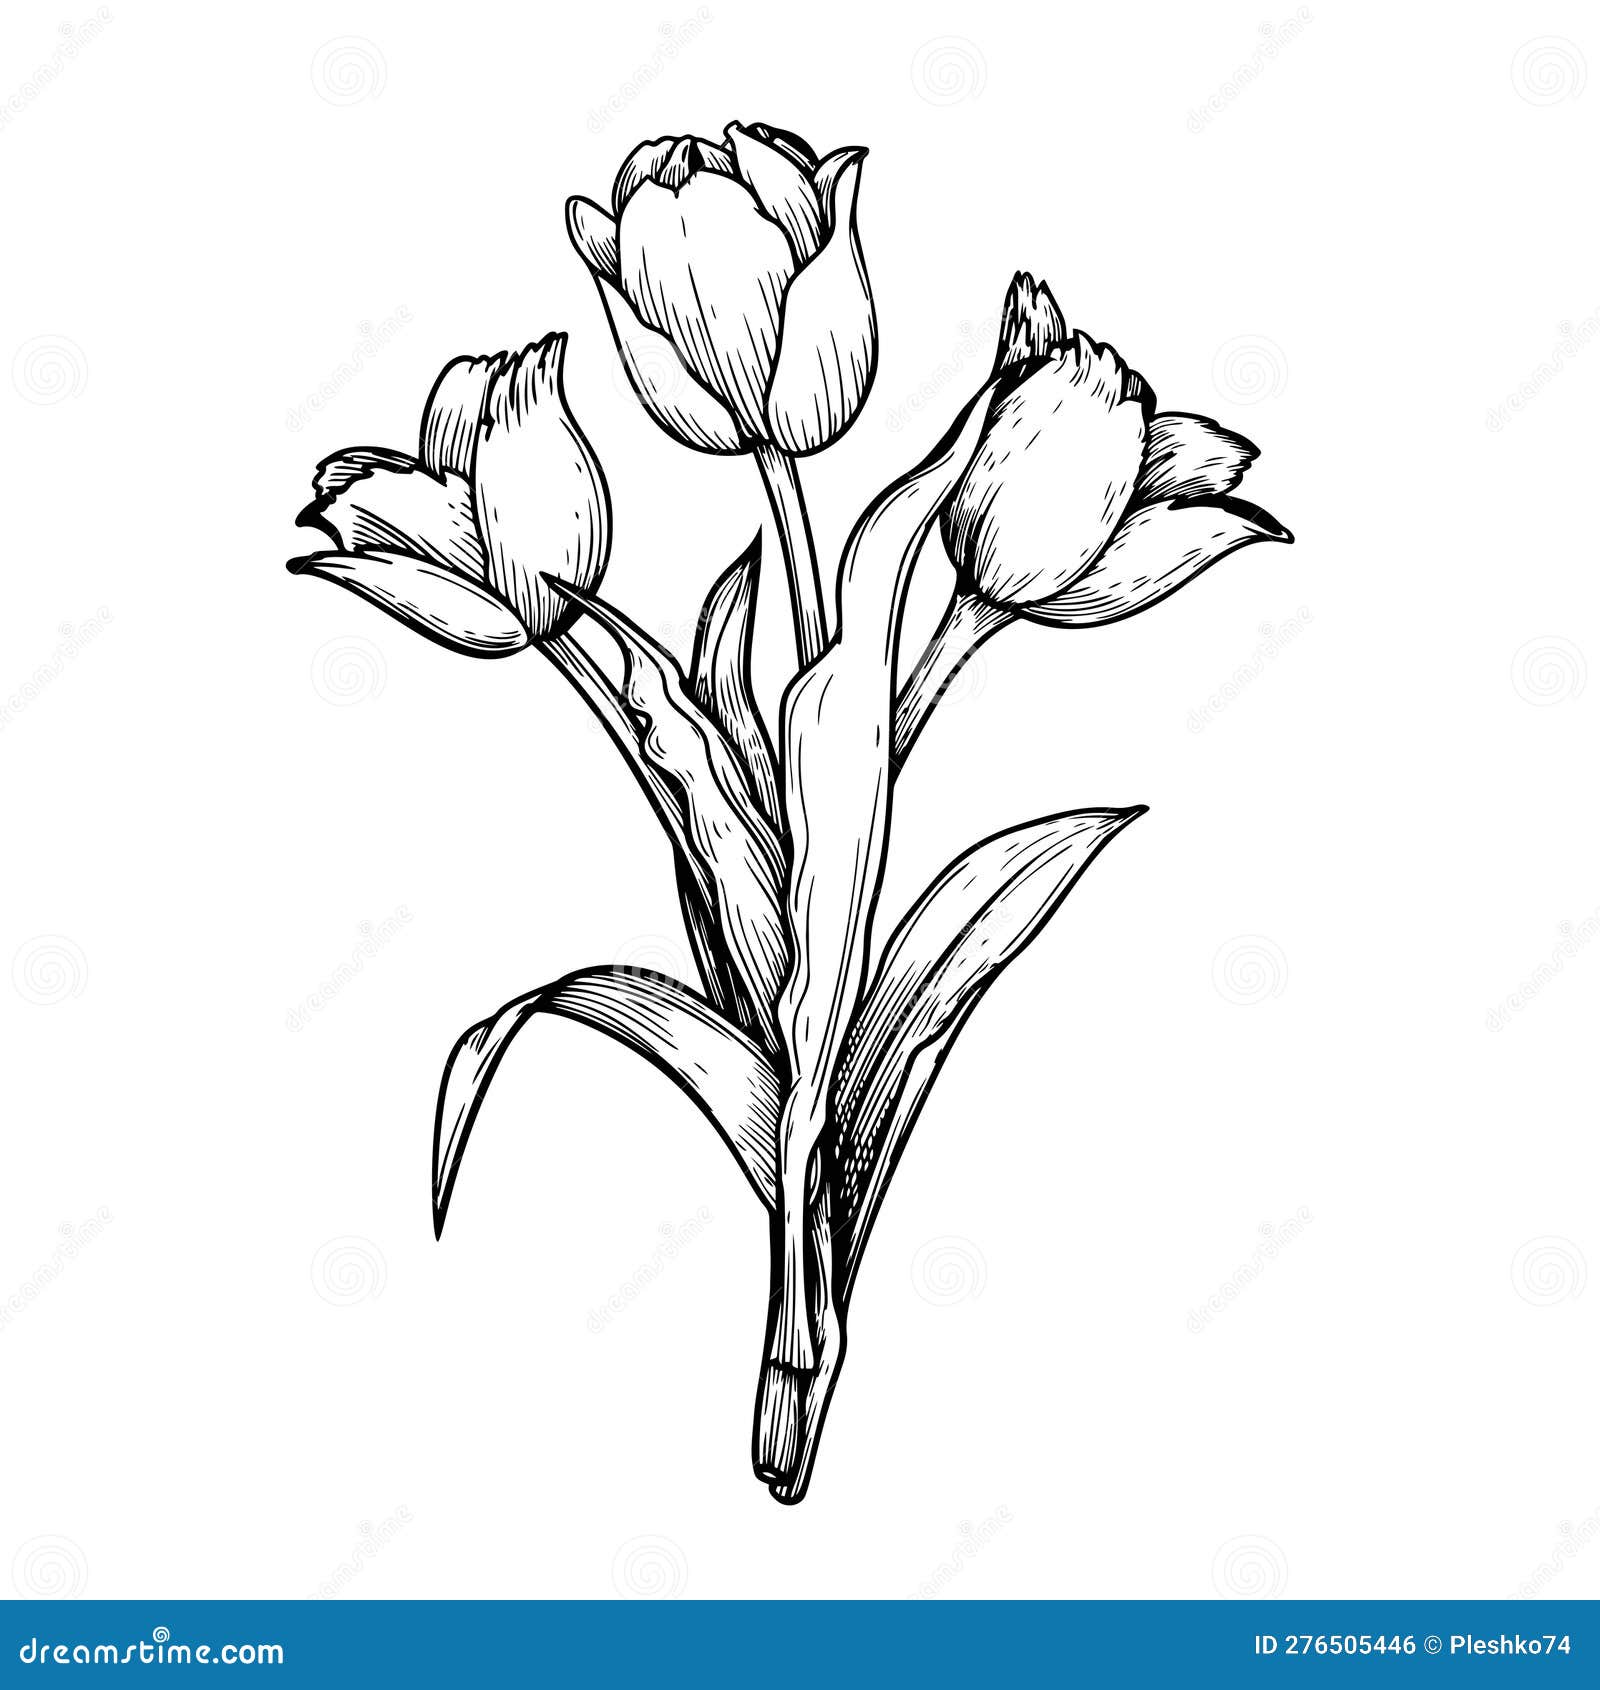 Hand Drawn Sketch Style Tulip Flowers Bouquet. Black and White Pen and ...